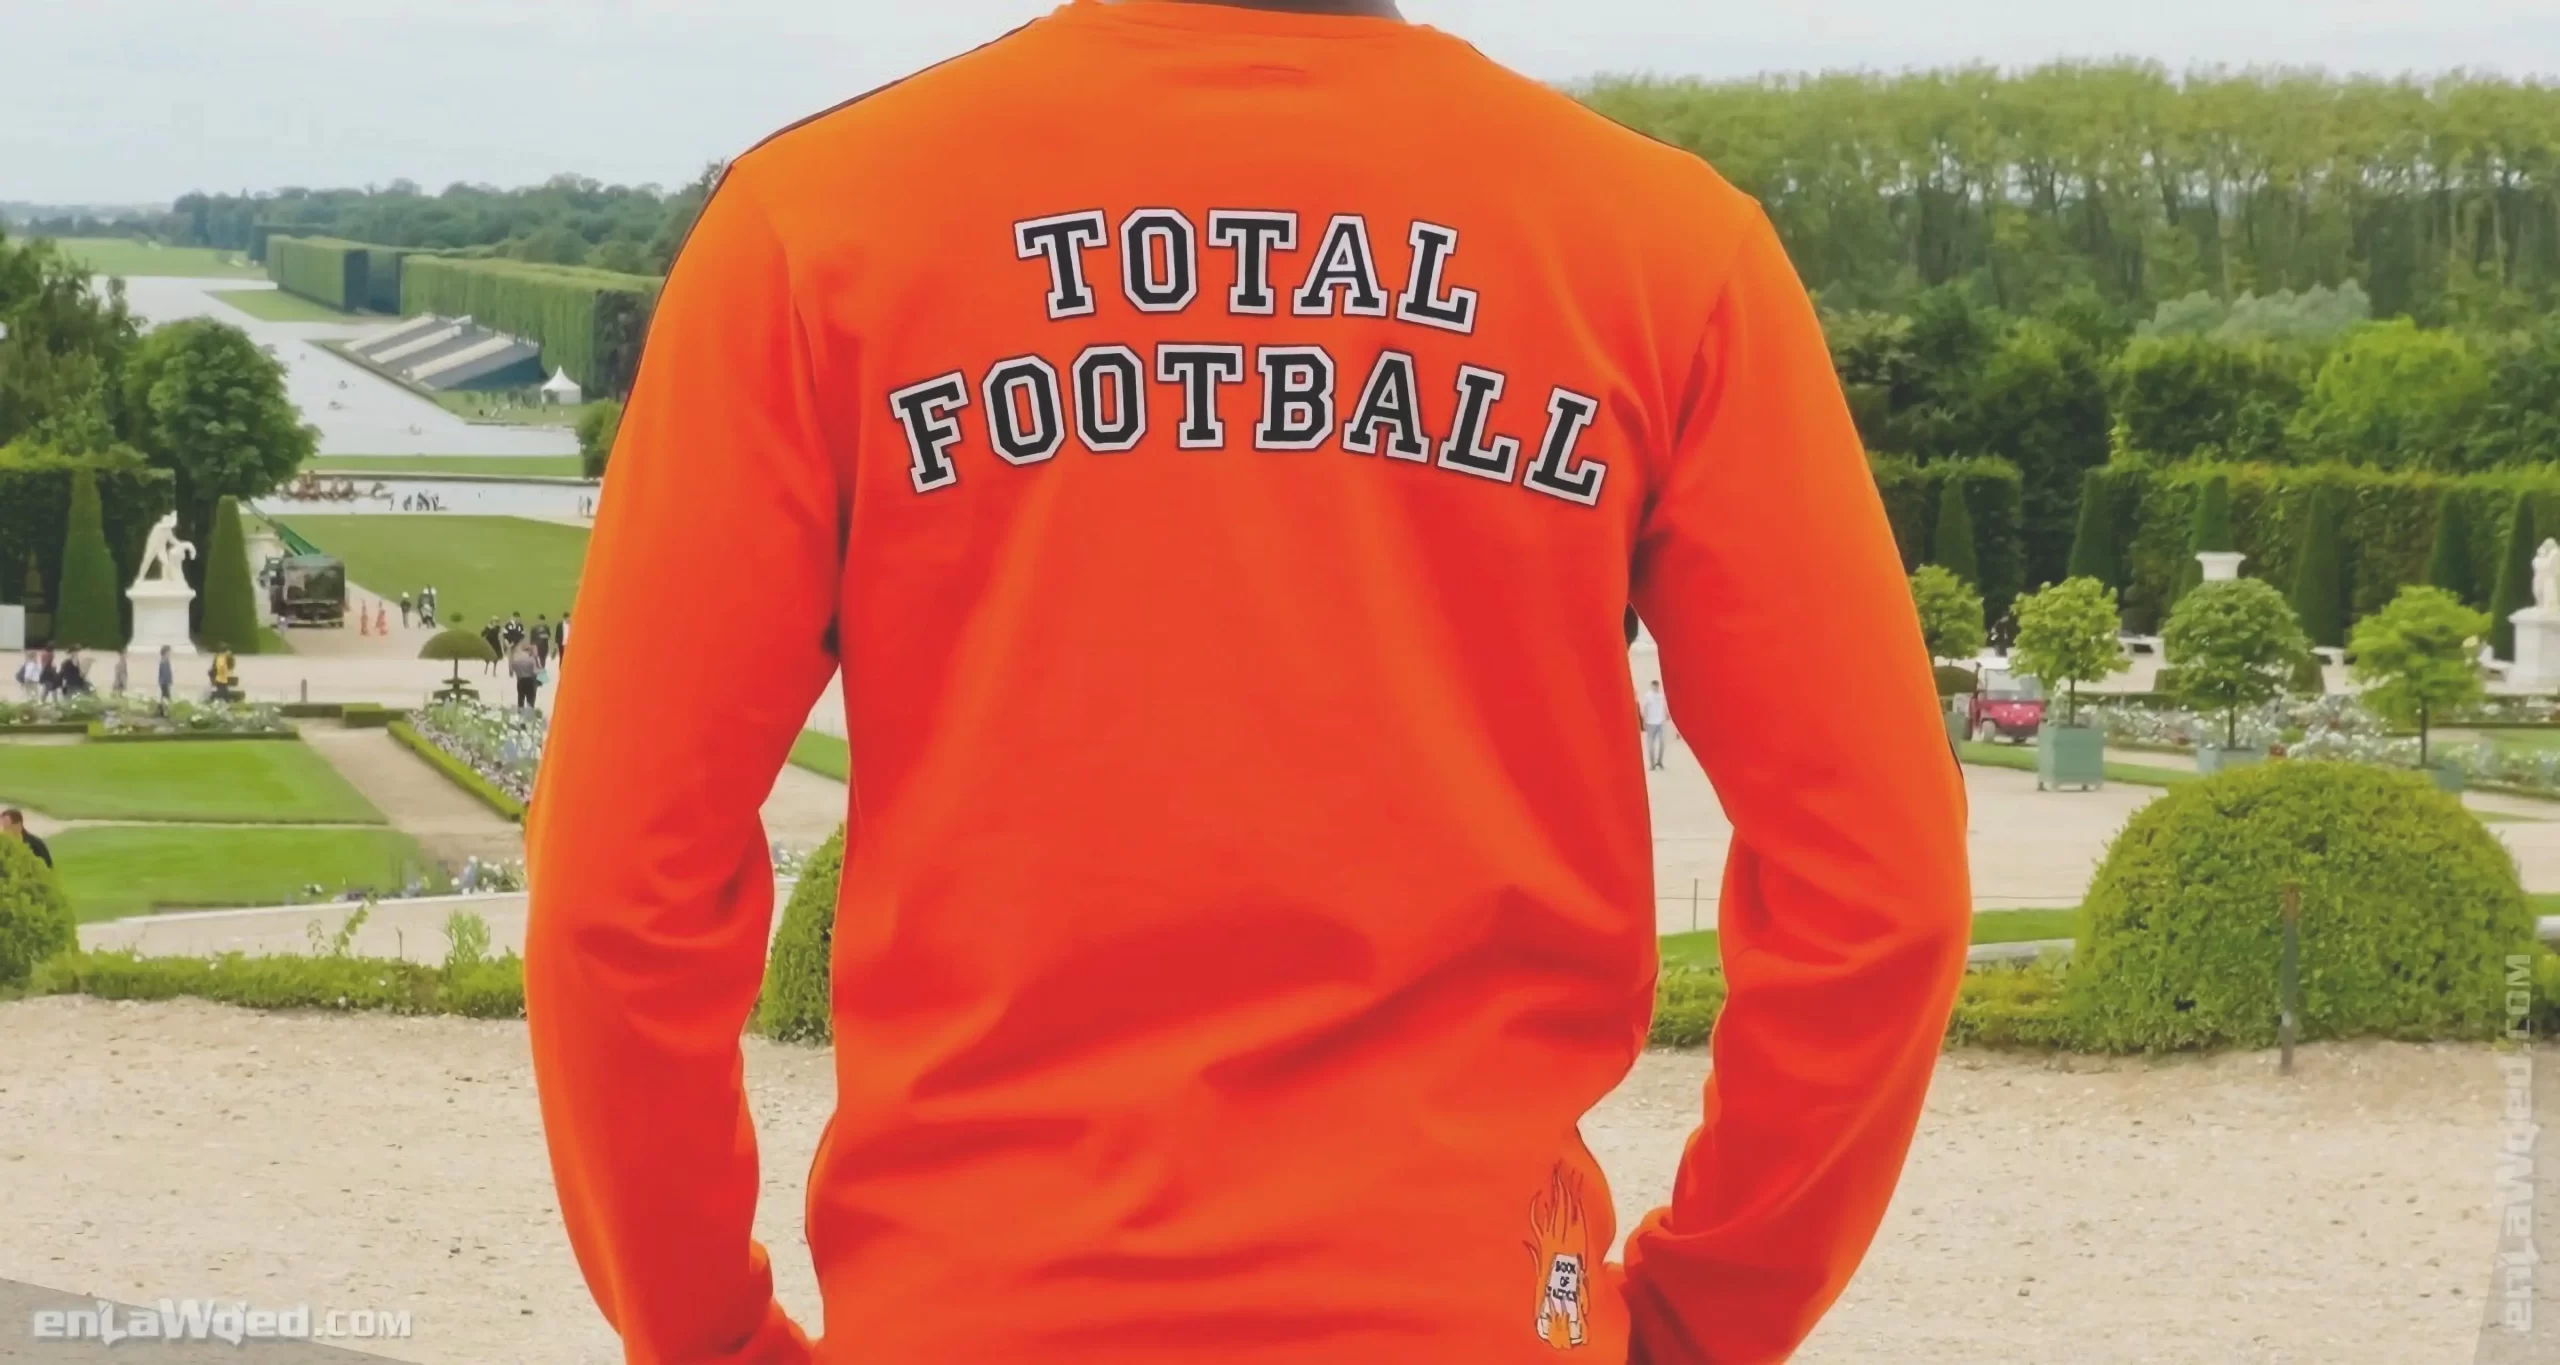 Men’s 2007 Netherlands ’74 Total Football LS by Adidas: Courageous (EnLawded.com file #lmc4wcrczytri0co5hg)